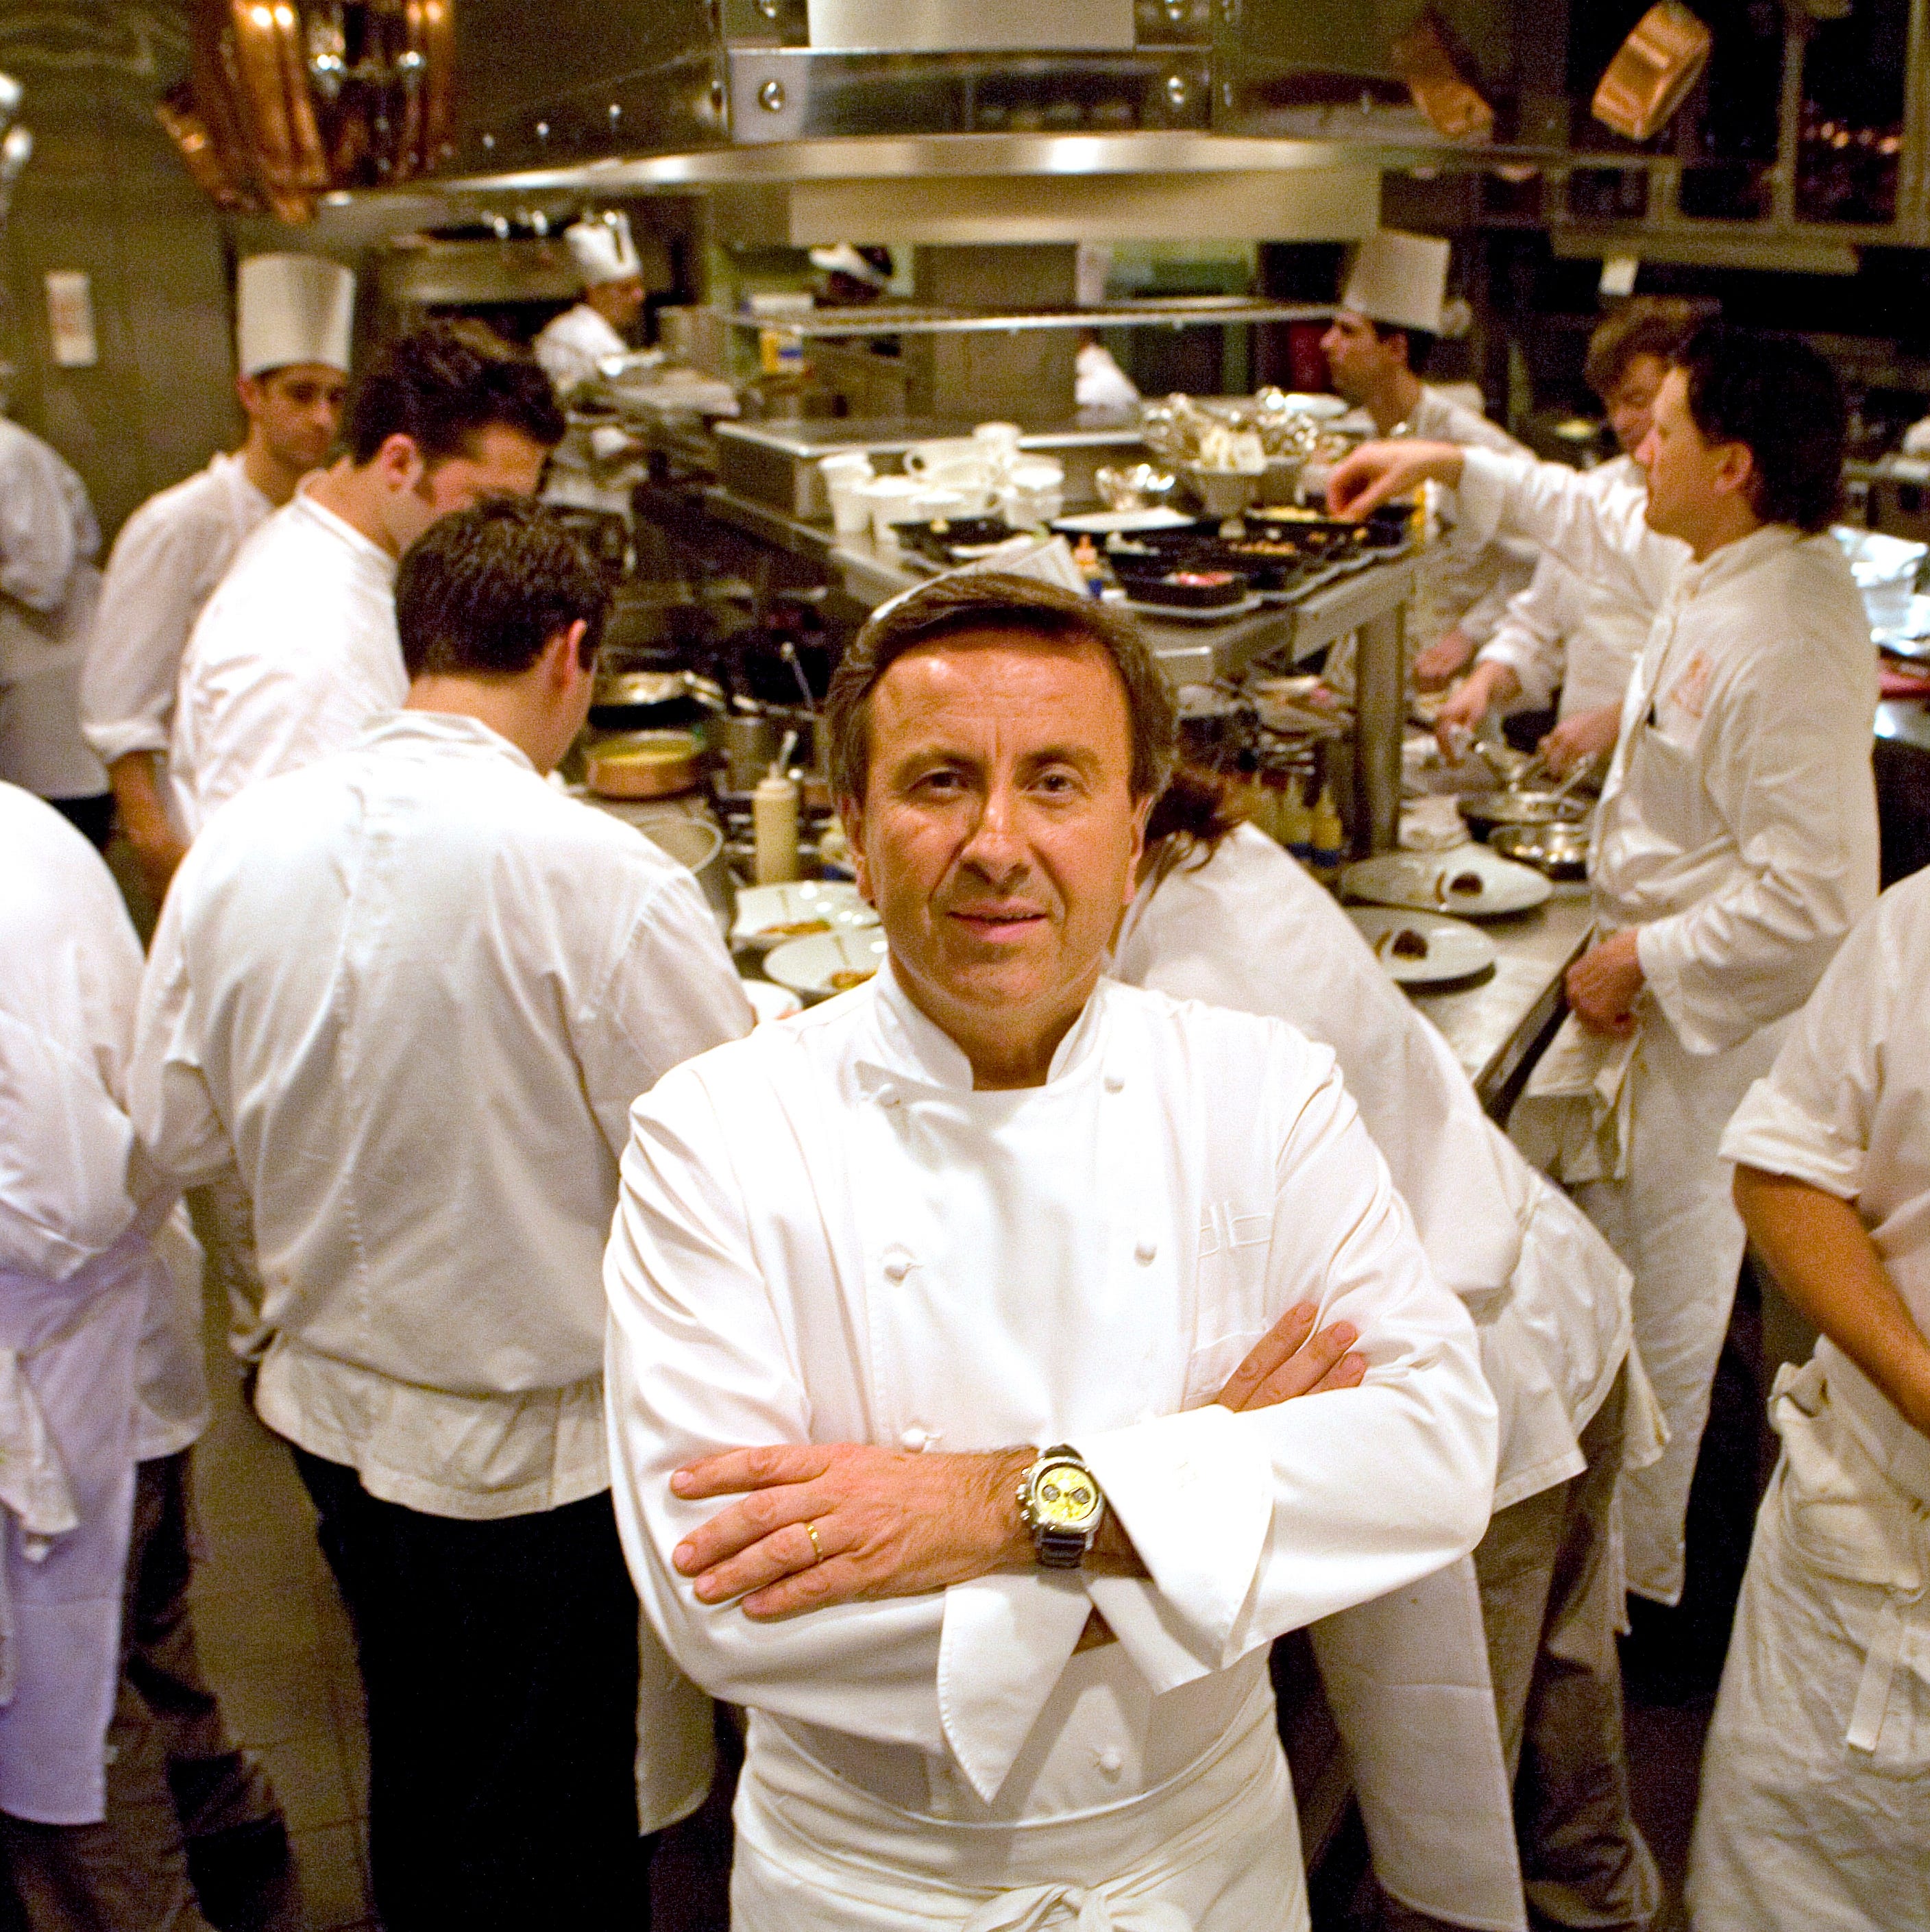 Inside Daniel: The Most Influential Kitchen in NYC